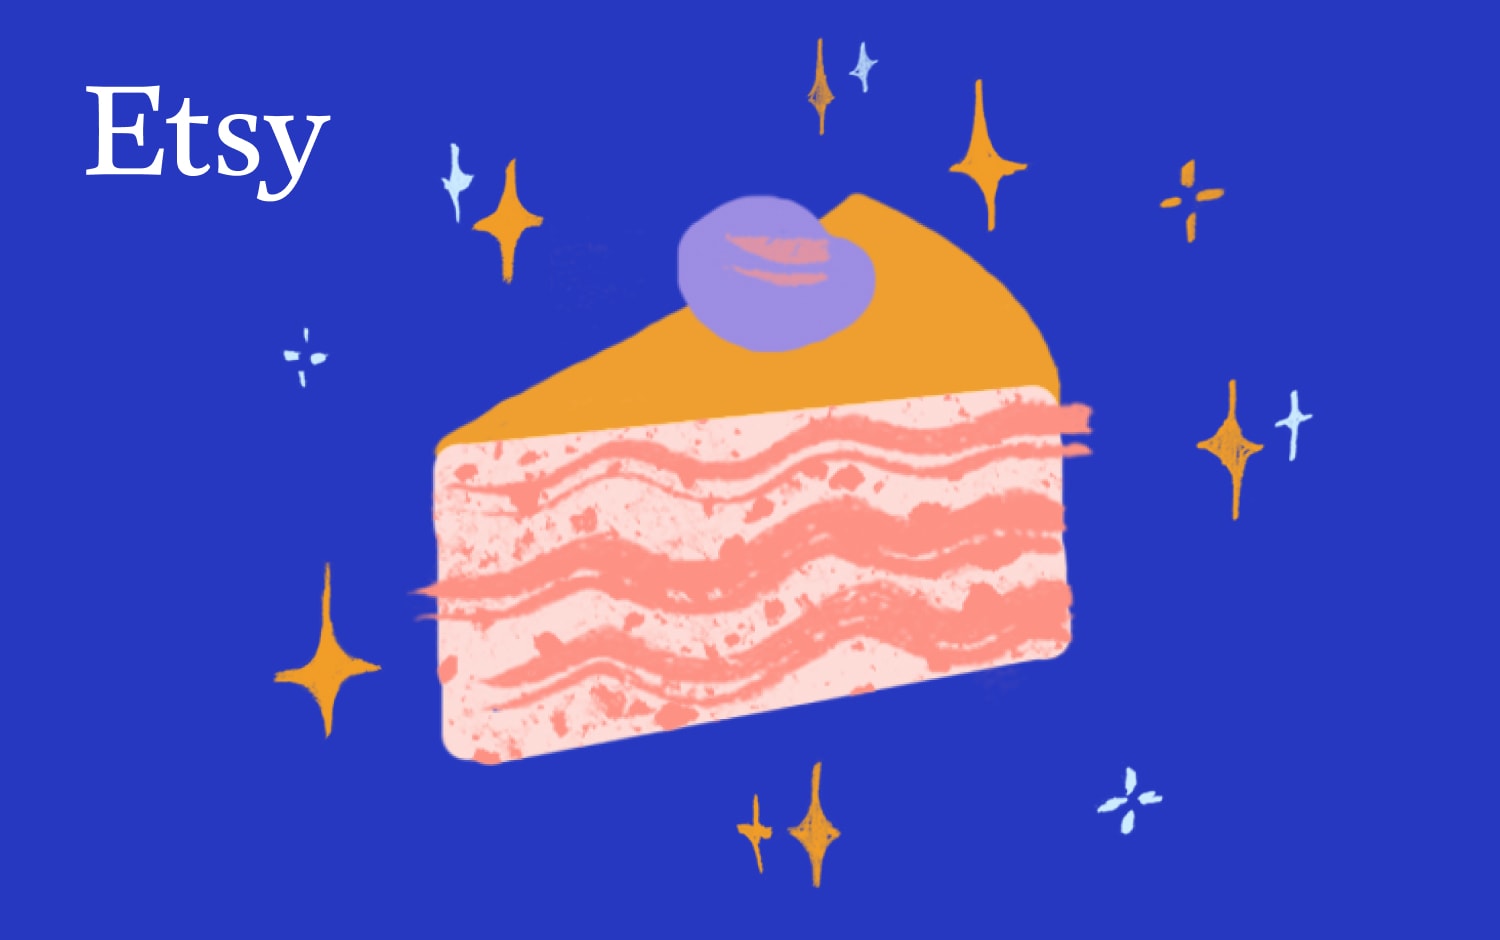 Illustration of a slice of sandwich cake with pink frosting, topped with a purple decoration resembling a berry. The cake is set against a deep blue background, sprinkled with various white and yellow sparkles. In the upper left corner, there's a white Etsy logo